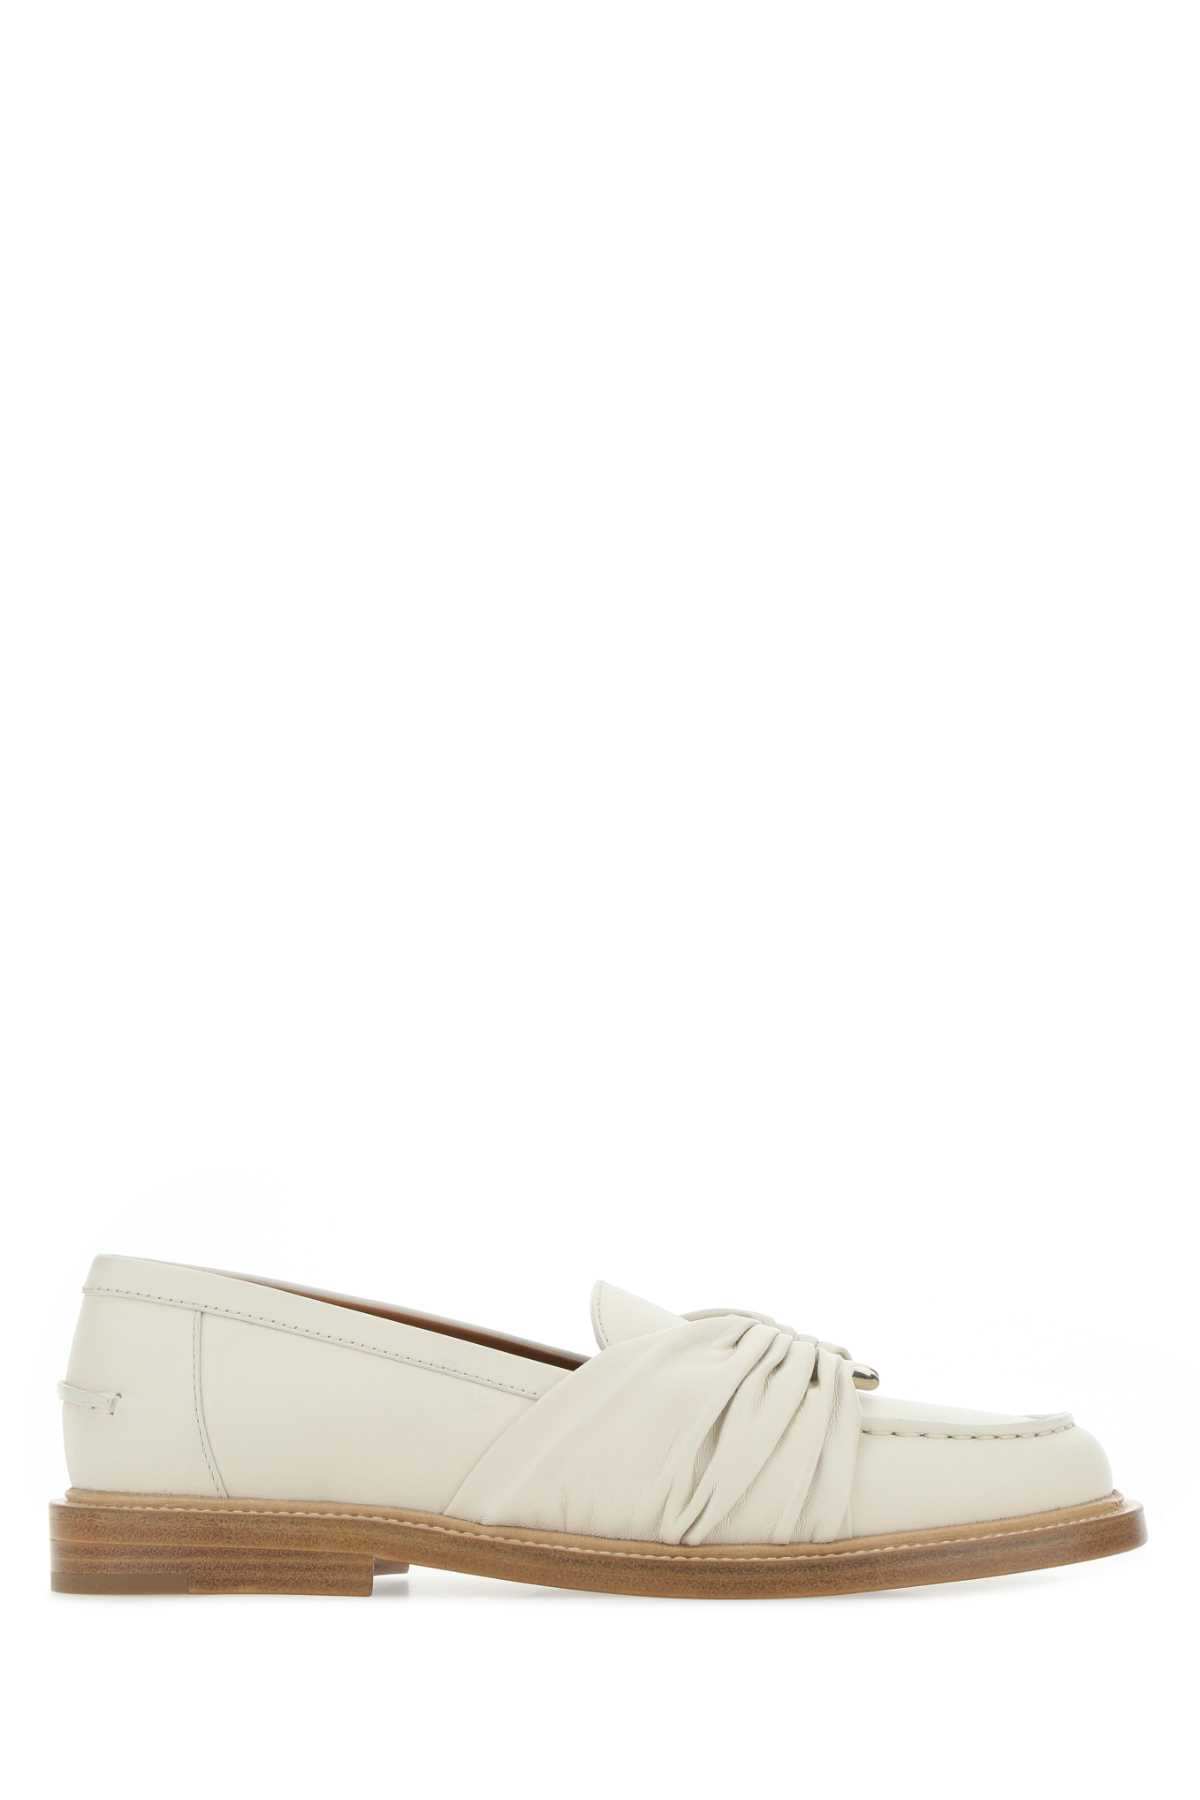 Chloé Ivory Leather Loafers